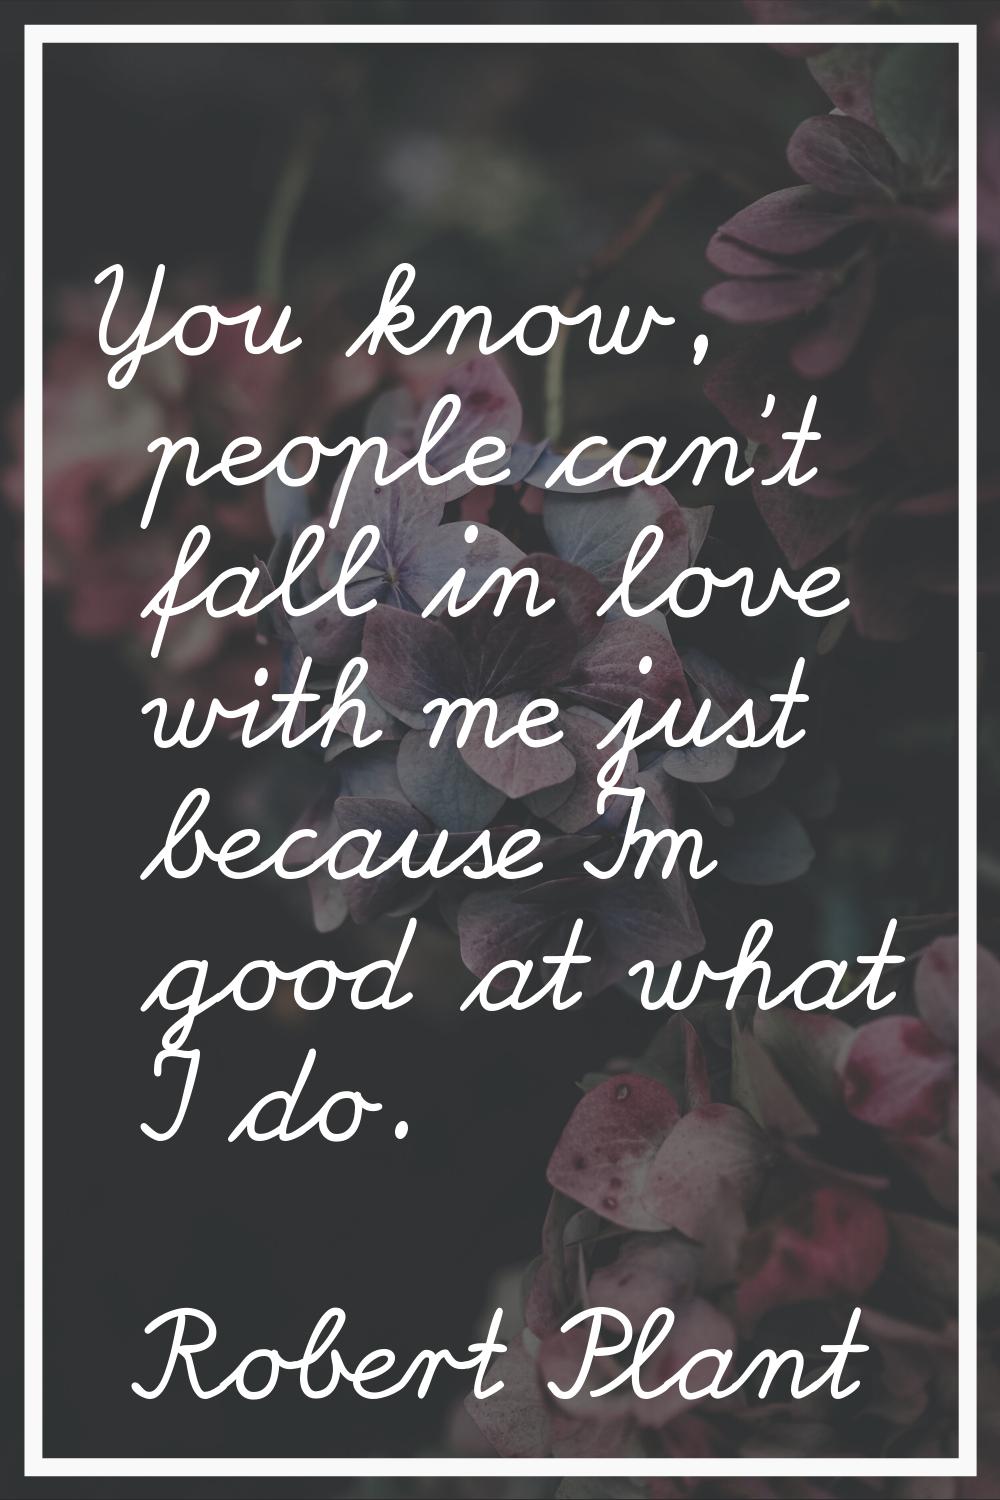 You know, people can't fall in love with me just because I'm good at what I do.